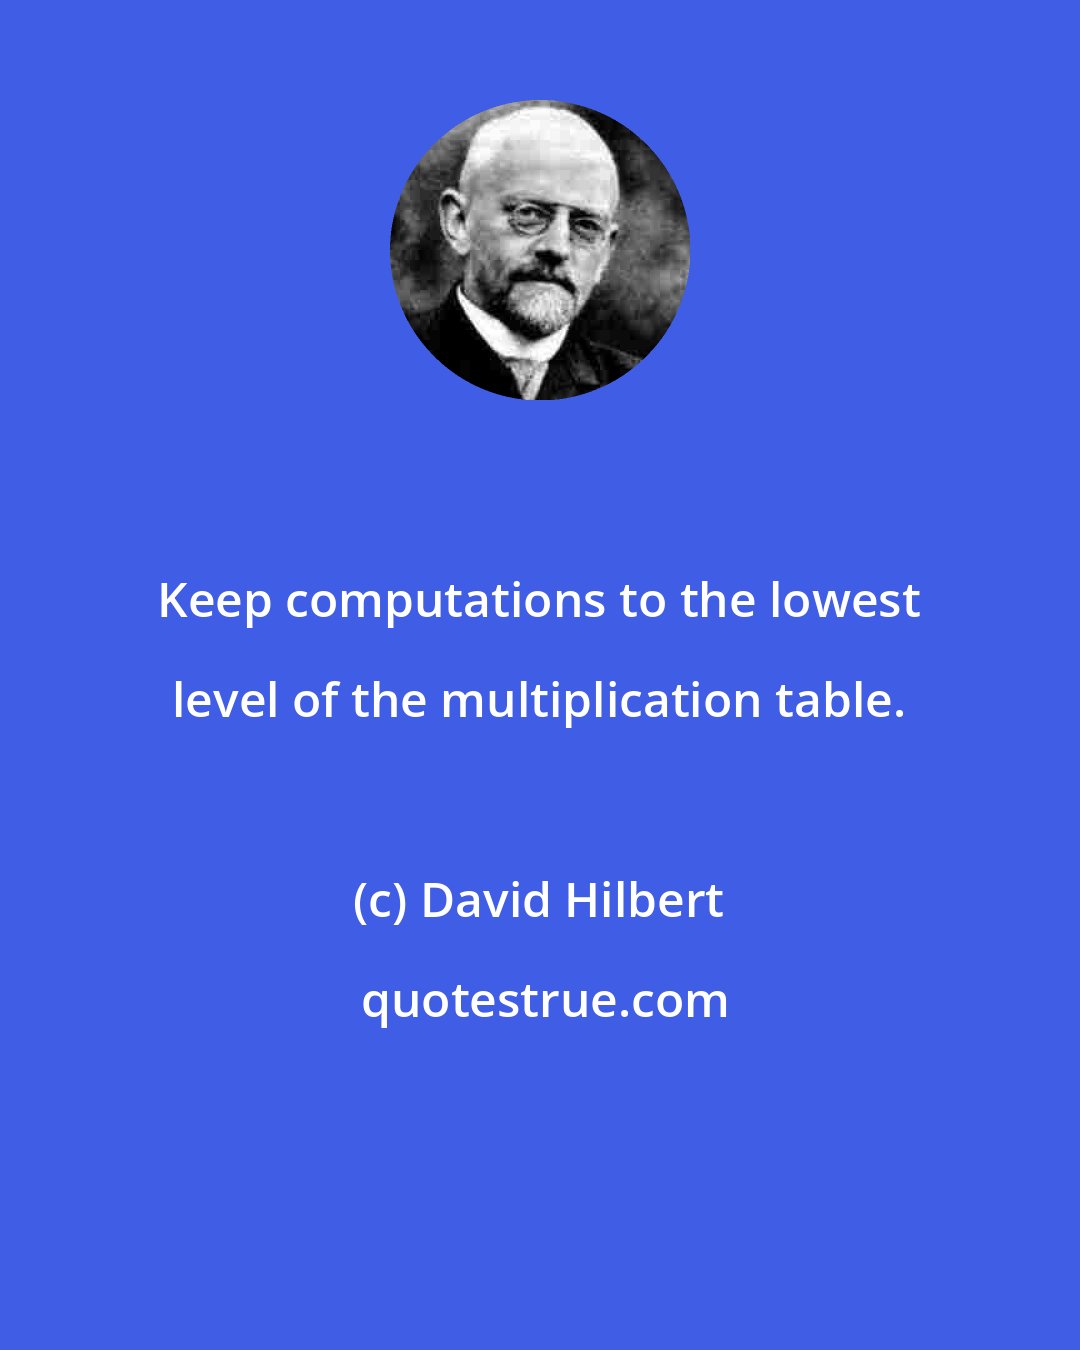 David Hilbert: Keep computations to the lowest level of the multiplication table.